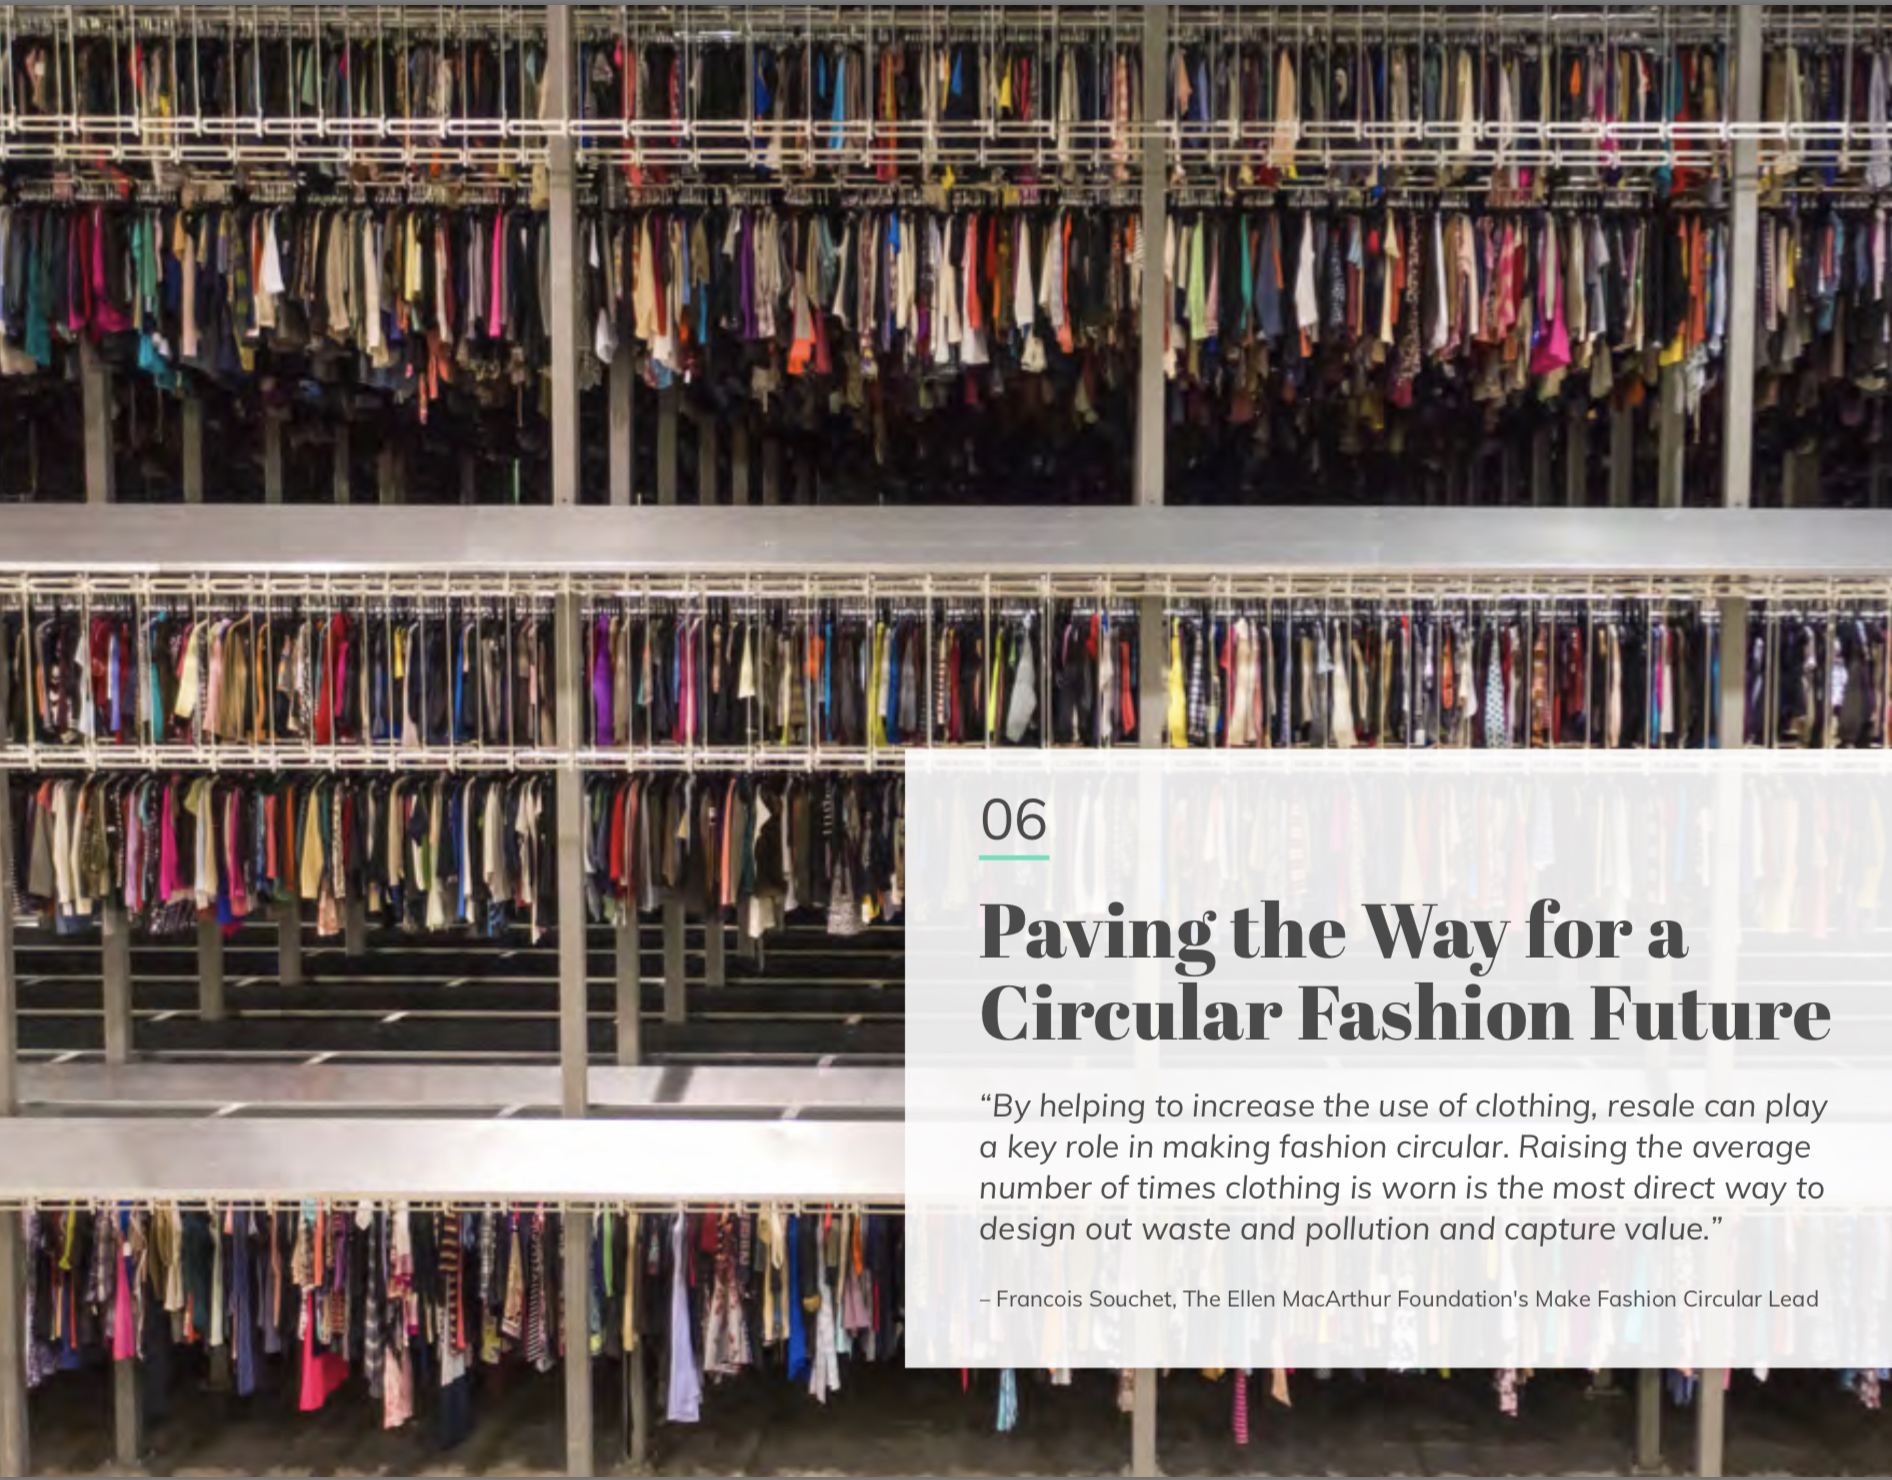 Resale can play a key role in making fashion circular. Raising the average number of times clothing is worn is the most direct way to design out waste and pollution and capture value.